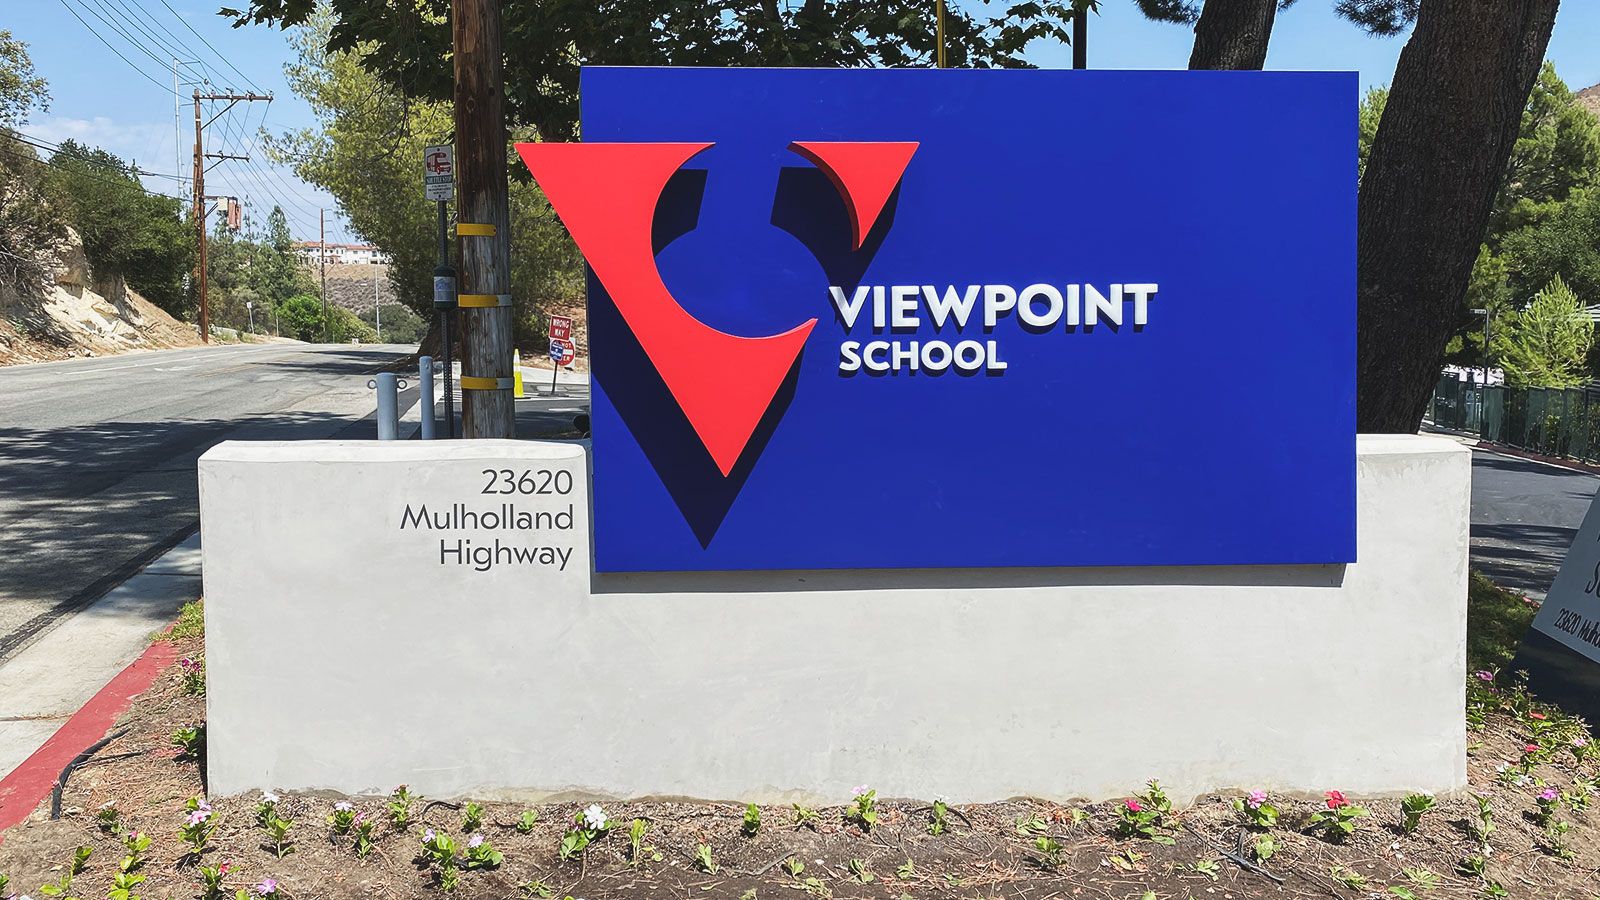 viewpoint school monument signage